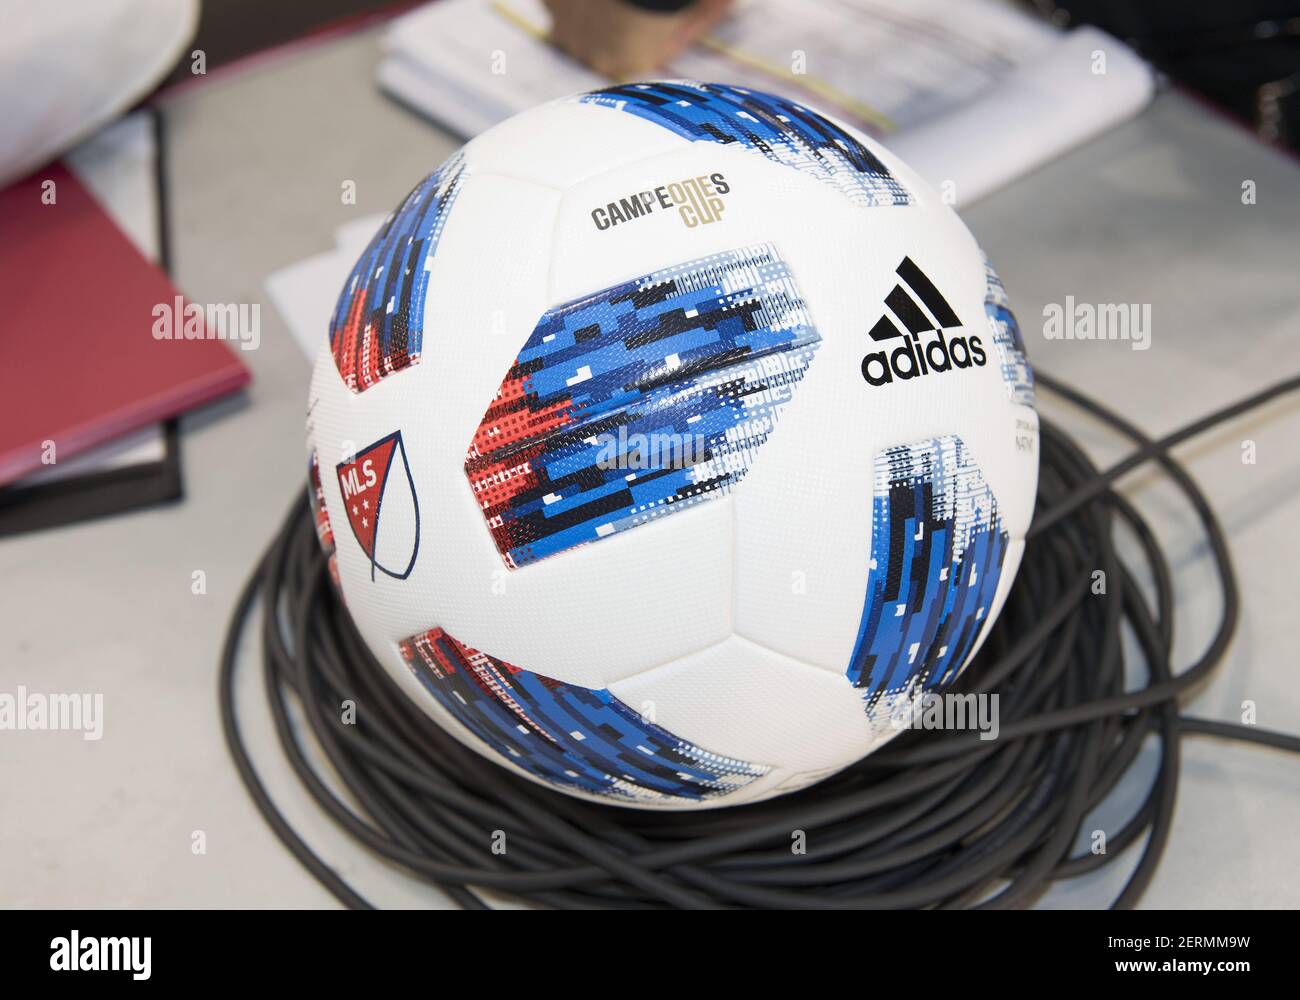 Sep 19, 2018; Toronto, Ontario, USA; The game ball sits on the table before  the Campeones Cup between UANL Tigres and Toronto FC at BMO Field.  Mandatory Credit: Nick Turchiaro-USA TODAY Sports/Sipa